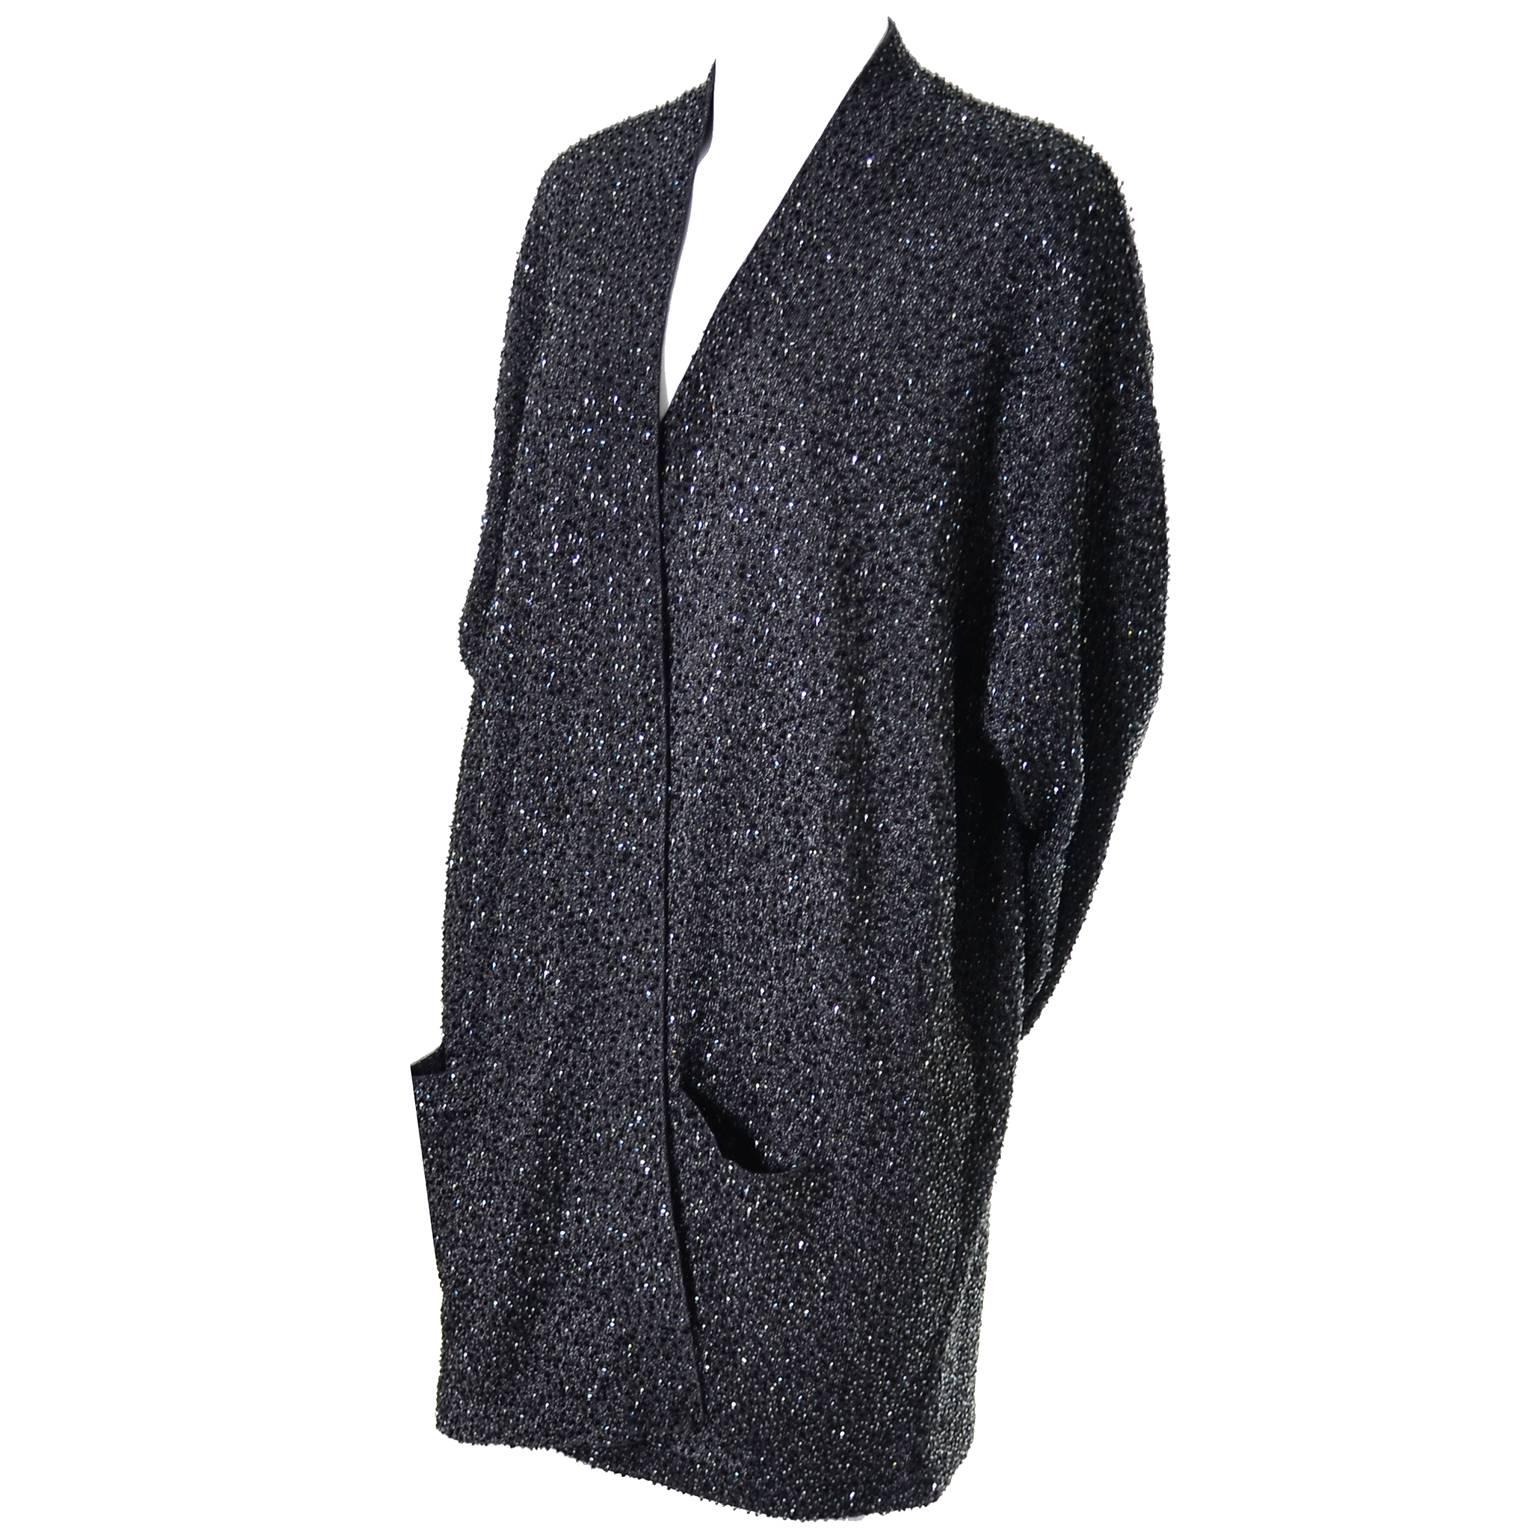 This is an absolutely exquisite vintage evening cardigan from Donna Karan. This is perfect to wear over a little black dress or with a pair of evening pants. This metallic wool/rayon blend open front jacket has front pockets and is covered in tiny